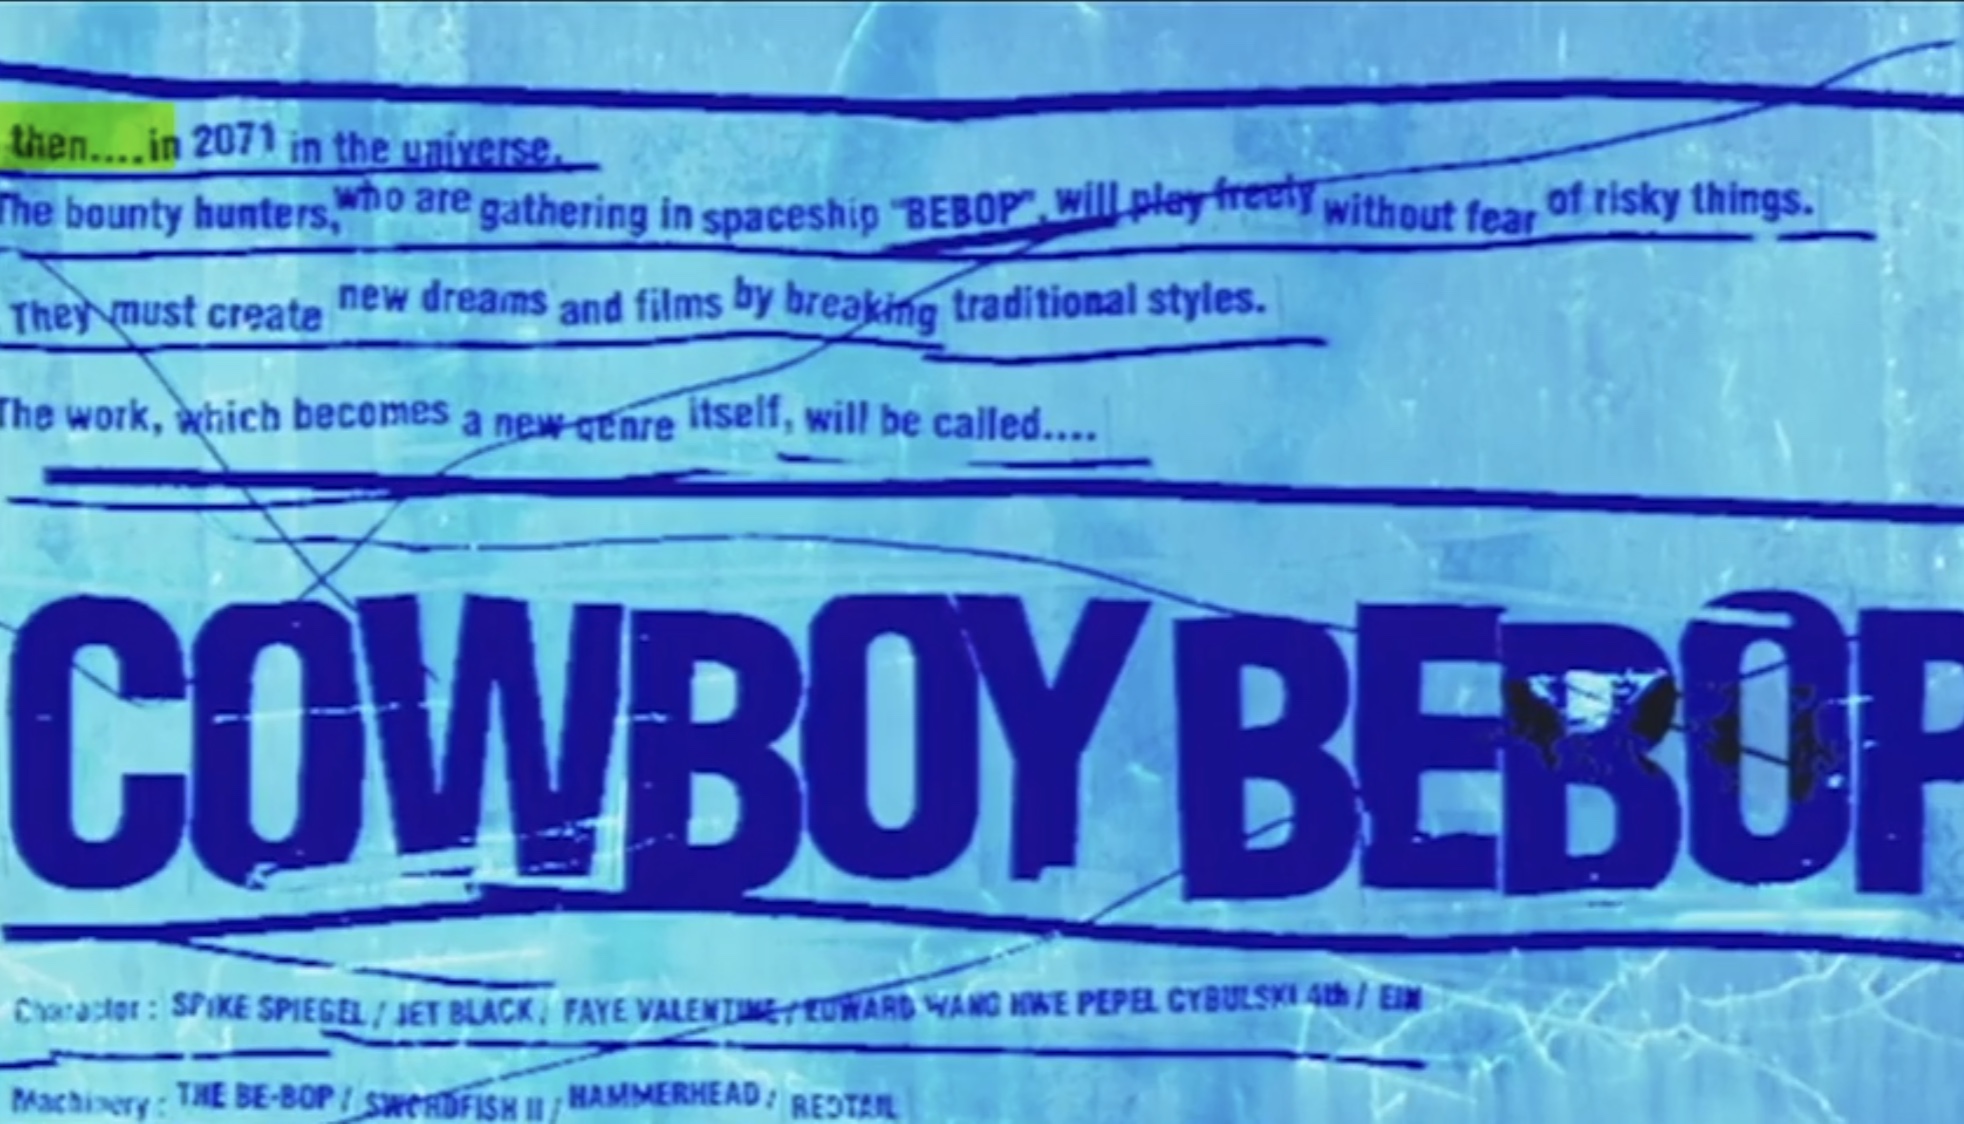 A title card from Cowboy Bebop (1998) that features a quote detailed directly after in the article in dark blue blocky text against a sky blue background.